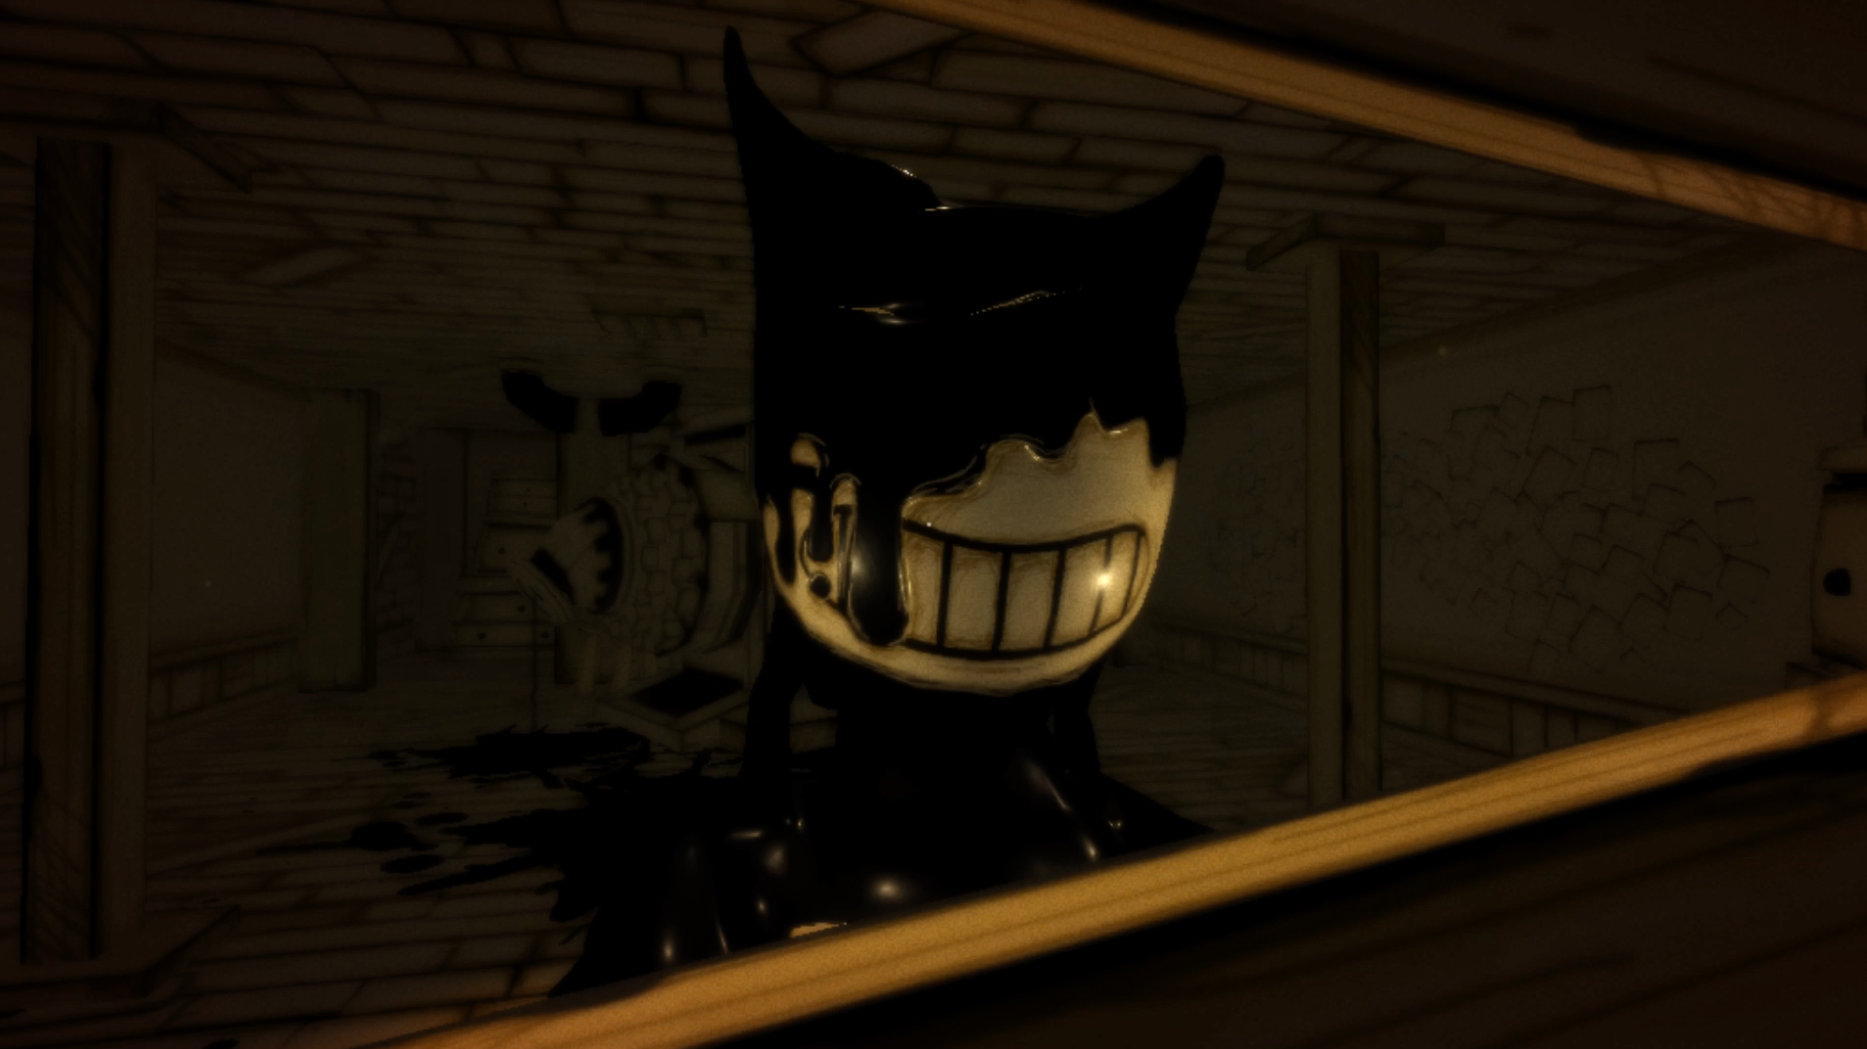 PC / Computer - Bendy and the Ink Machine - Alpha Bendy - The